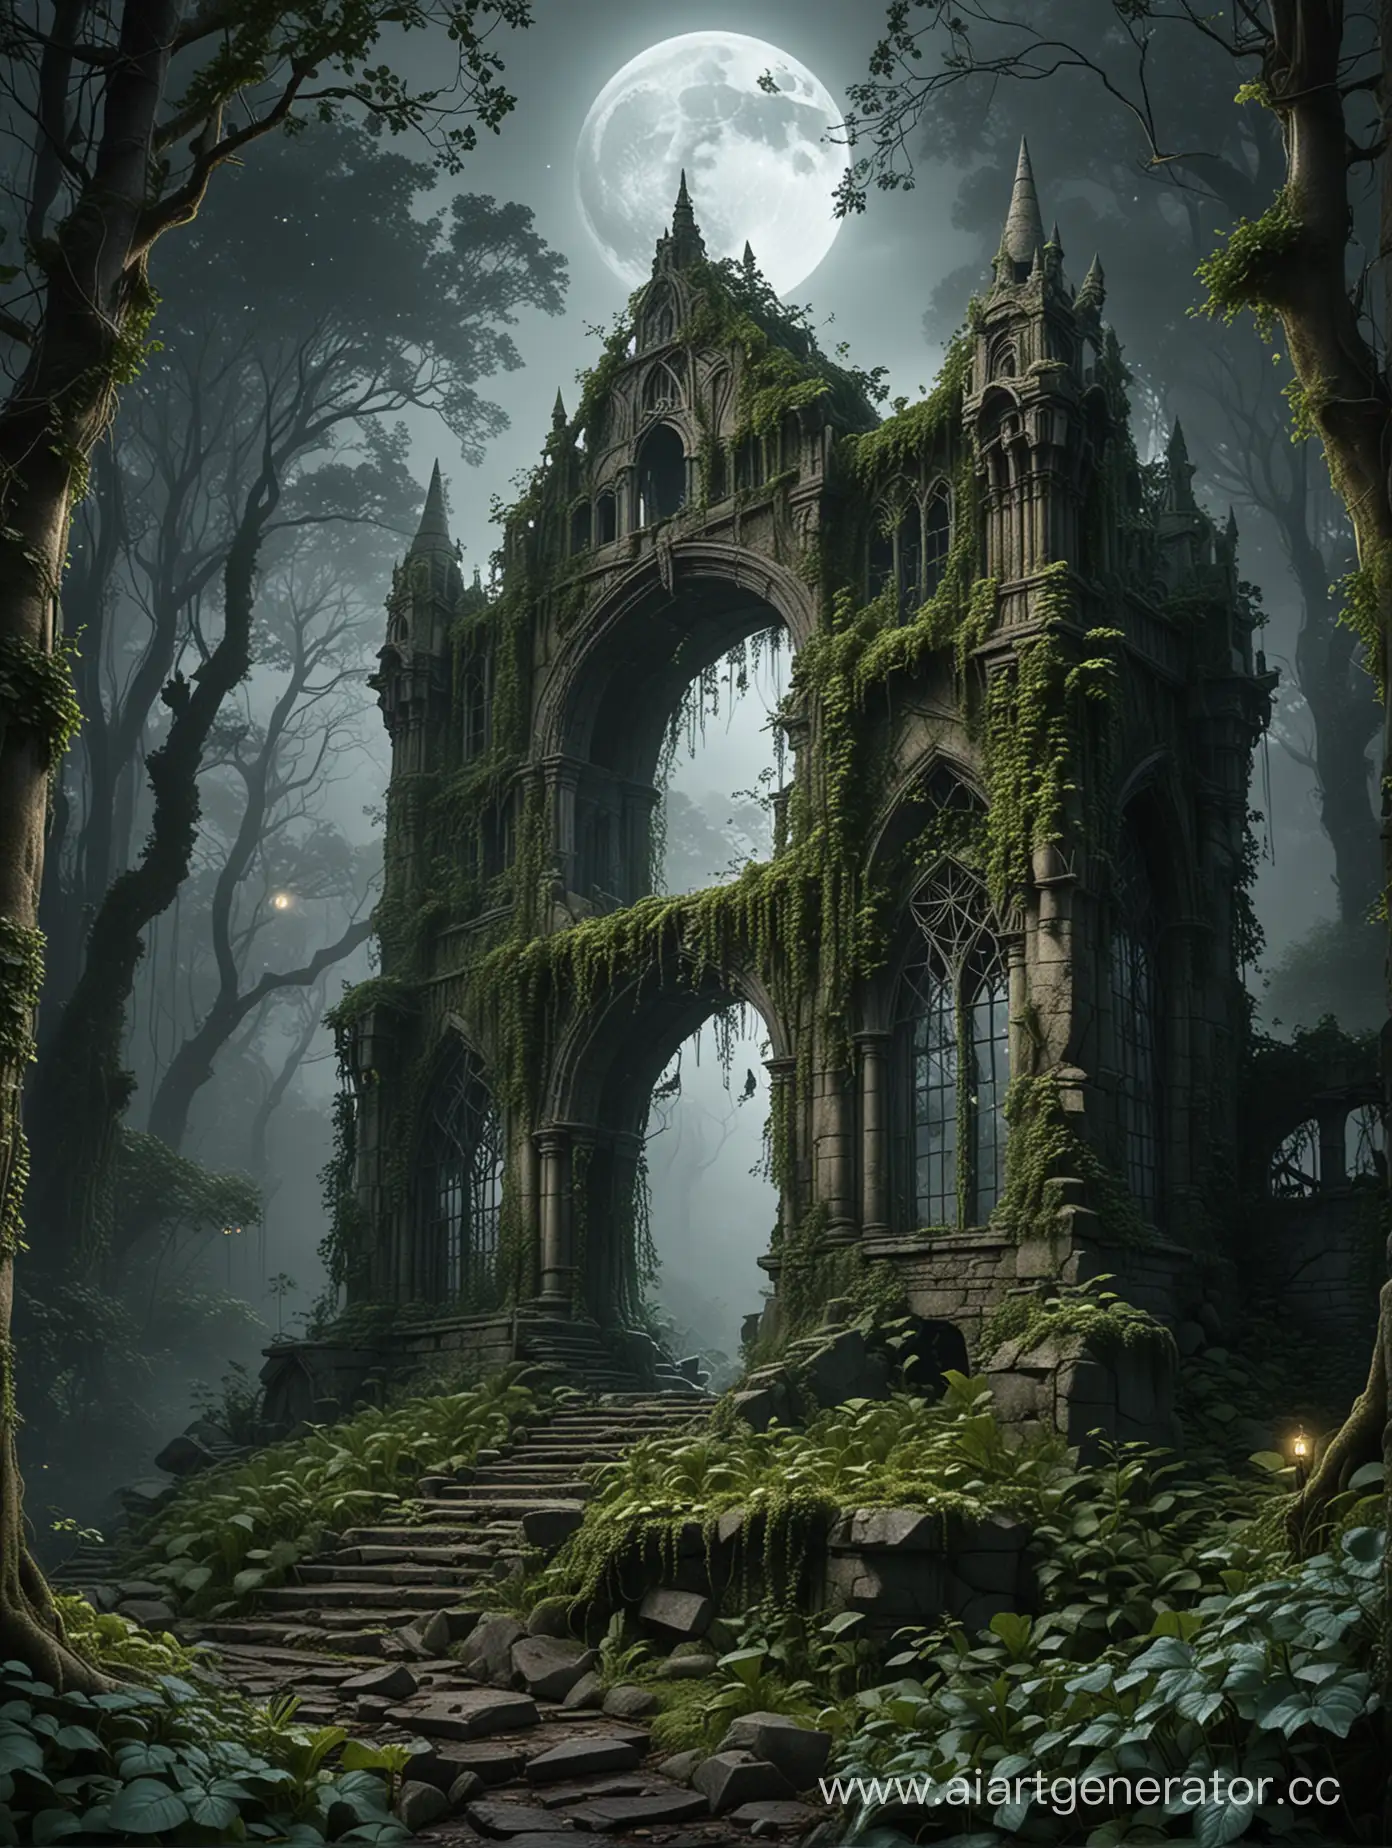 Moonlit-Elven-Palace-Ruins-Enveloped-by-Ivy-and-Moss